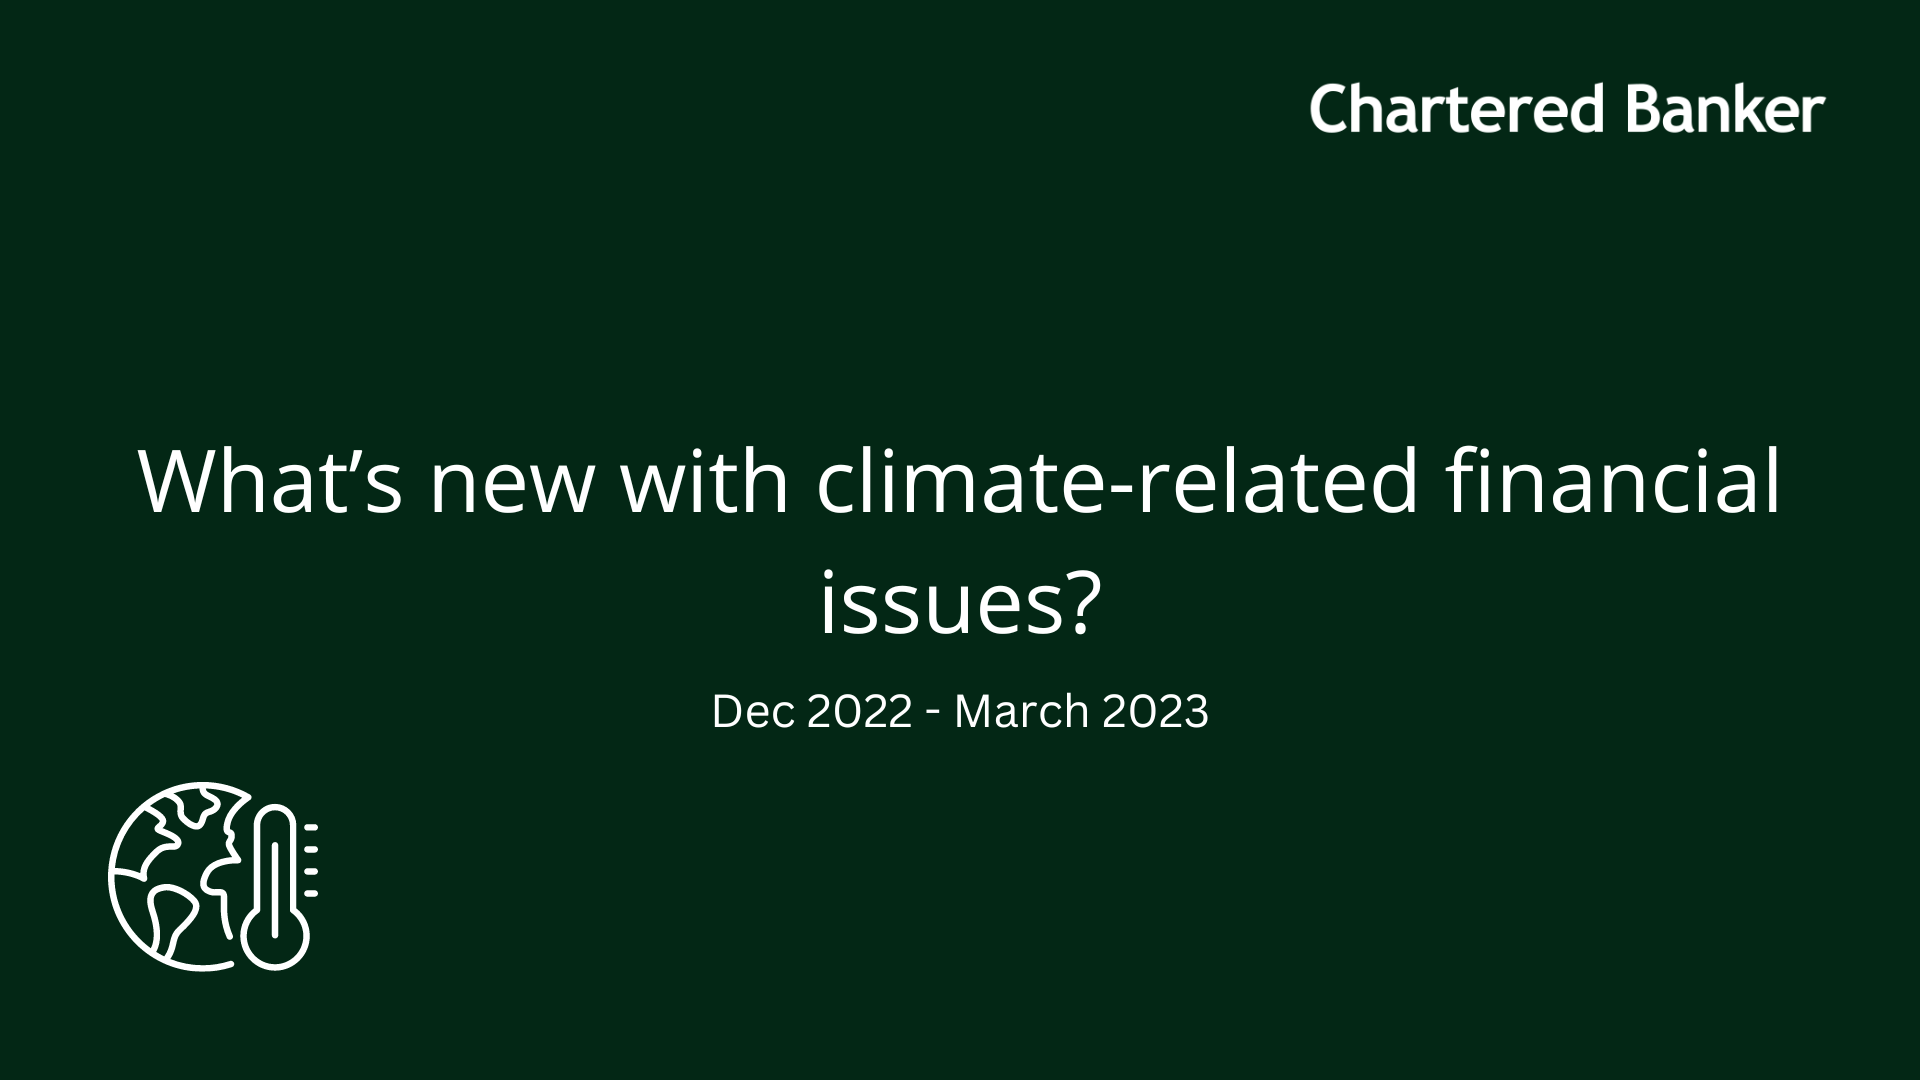 What's new with Climate-related financial issues - December 2022 - March 2023